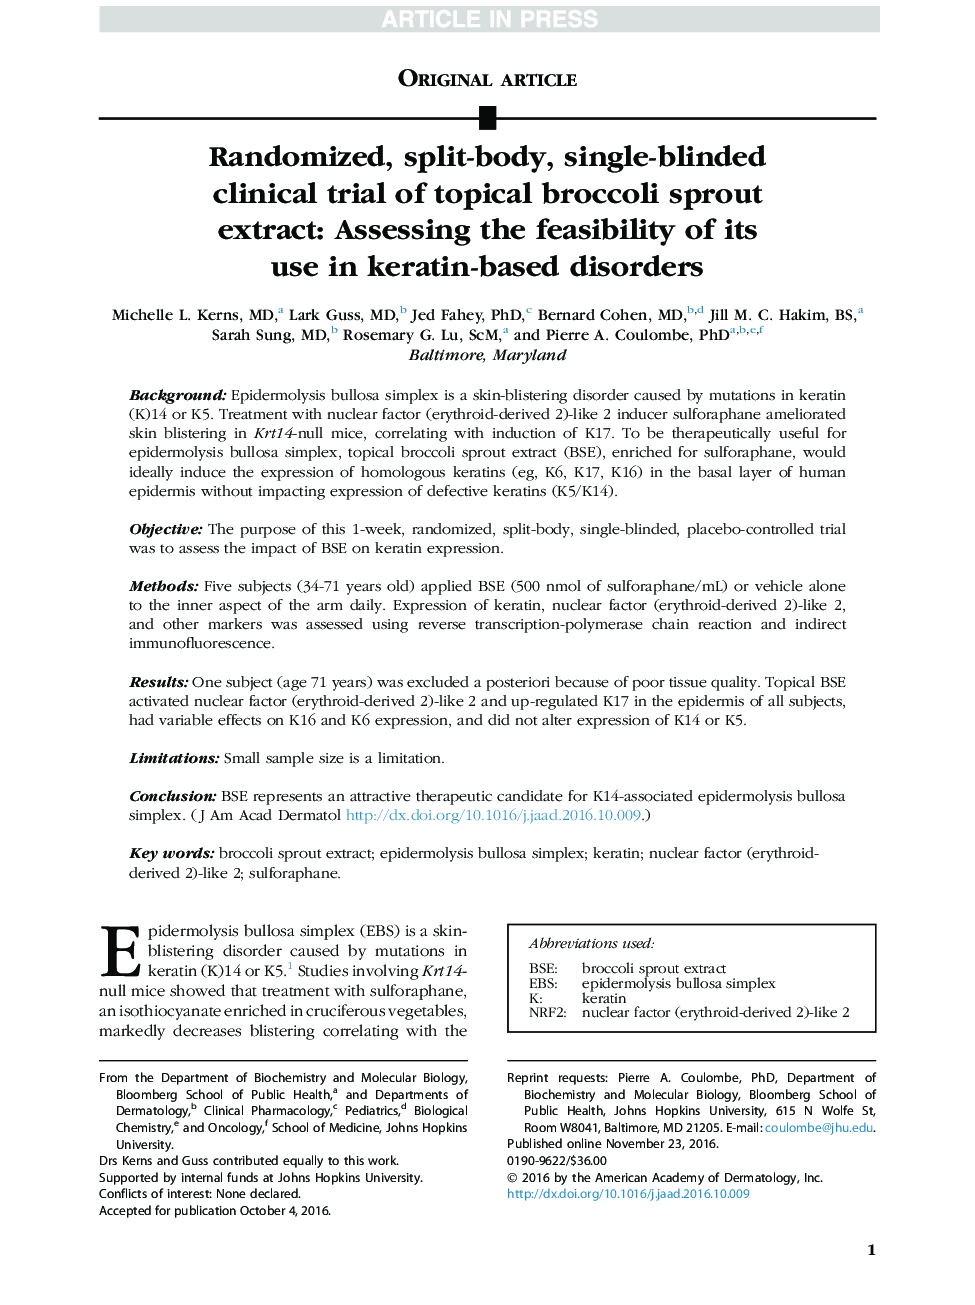 Randomized, split-body, single-blinded clinical trial of topical broccoli sprout extract: Assessing the feasibility of its use in keratin-based disorders